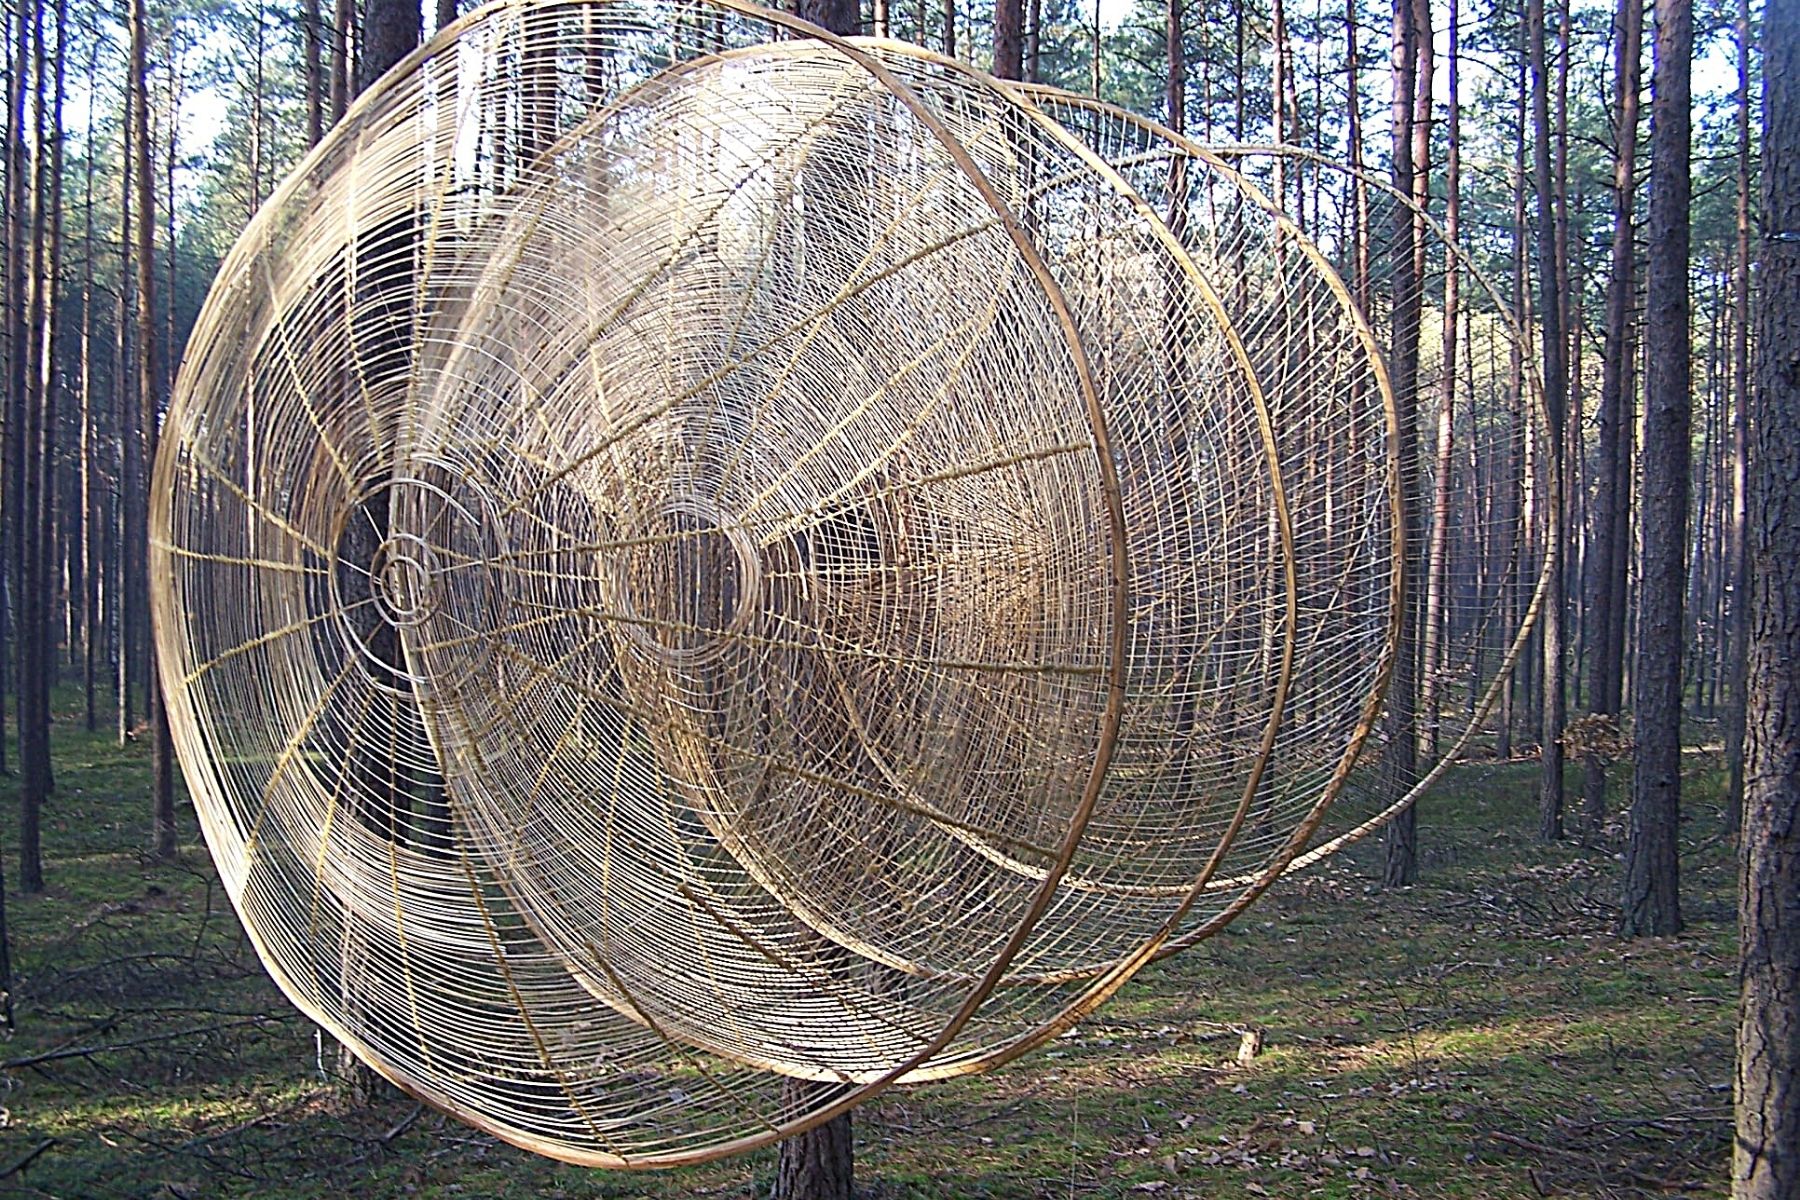 Land Art Is Miroslaw Maszlanko's Passion - An Unlimited Patience to Create Diffraction - Article on Thursd 